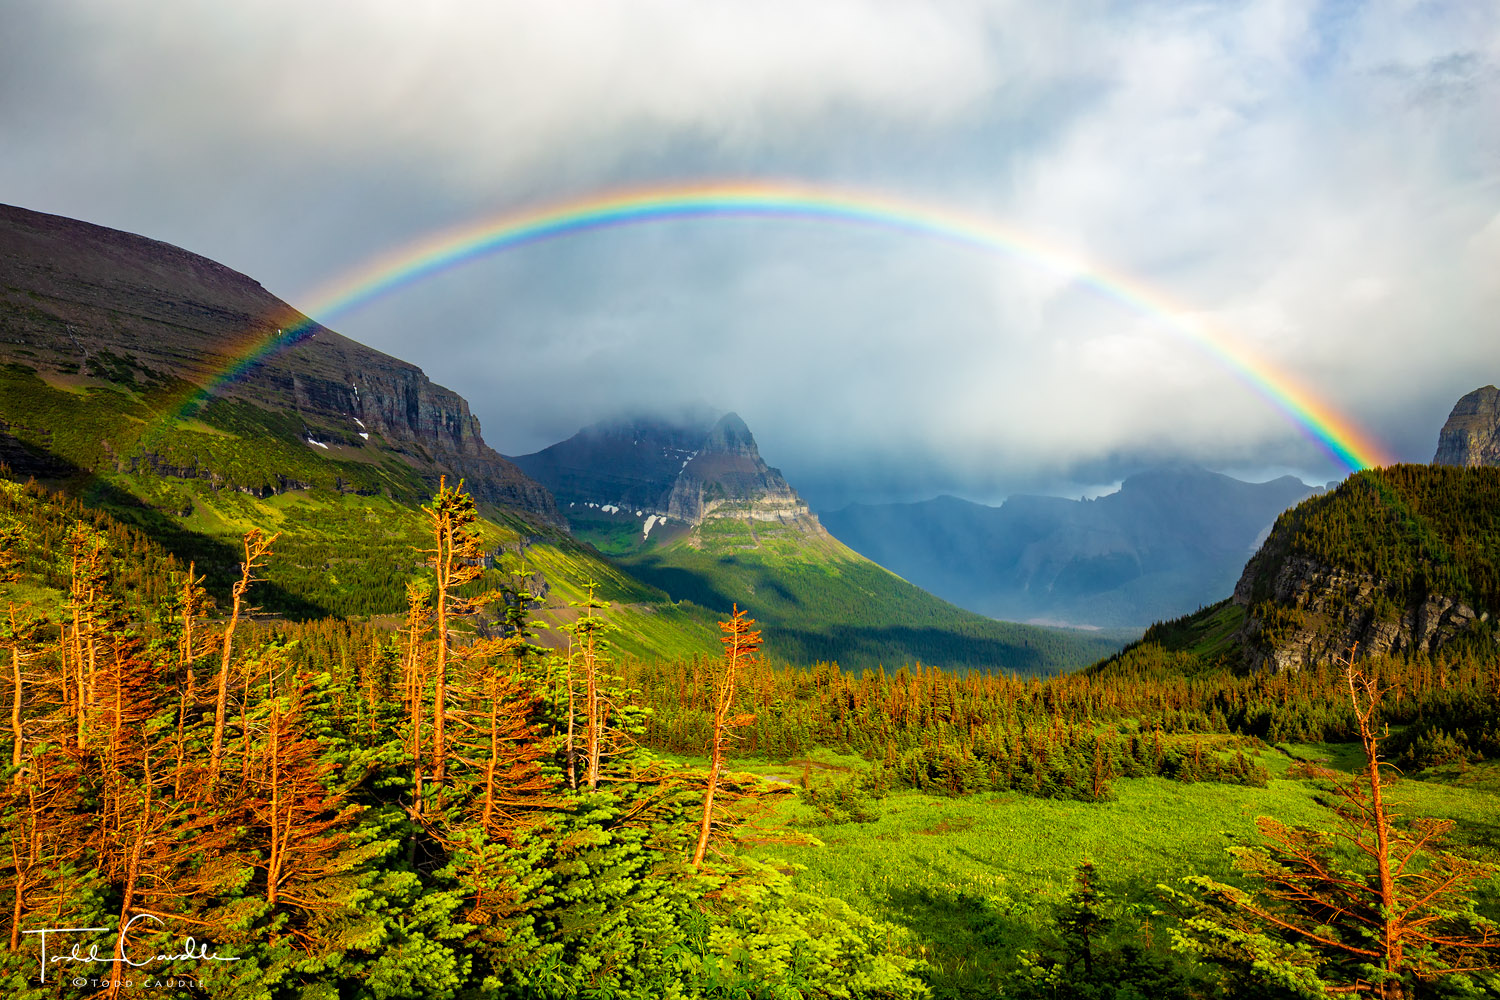 A fast-moving storm leaves a rainbow in its wake on Logan Pass.